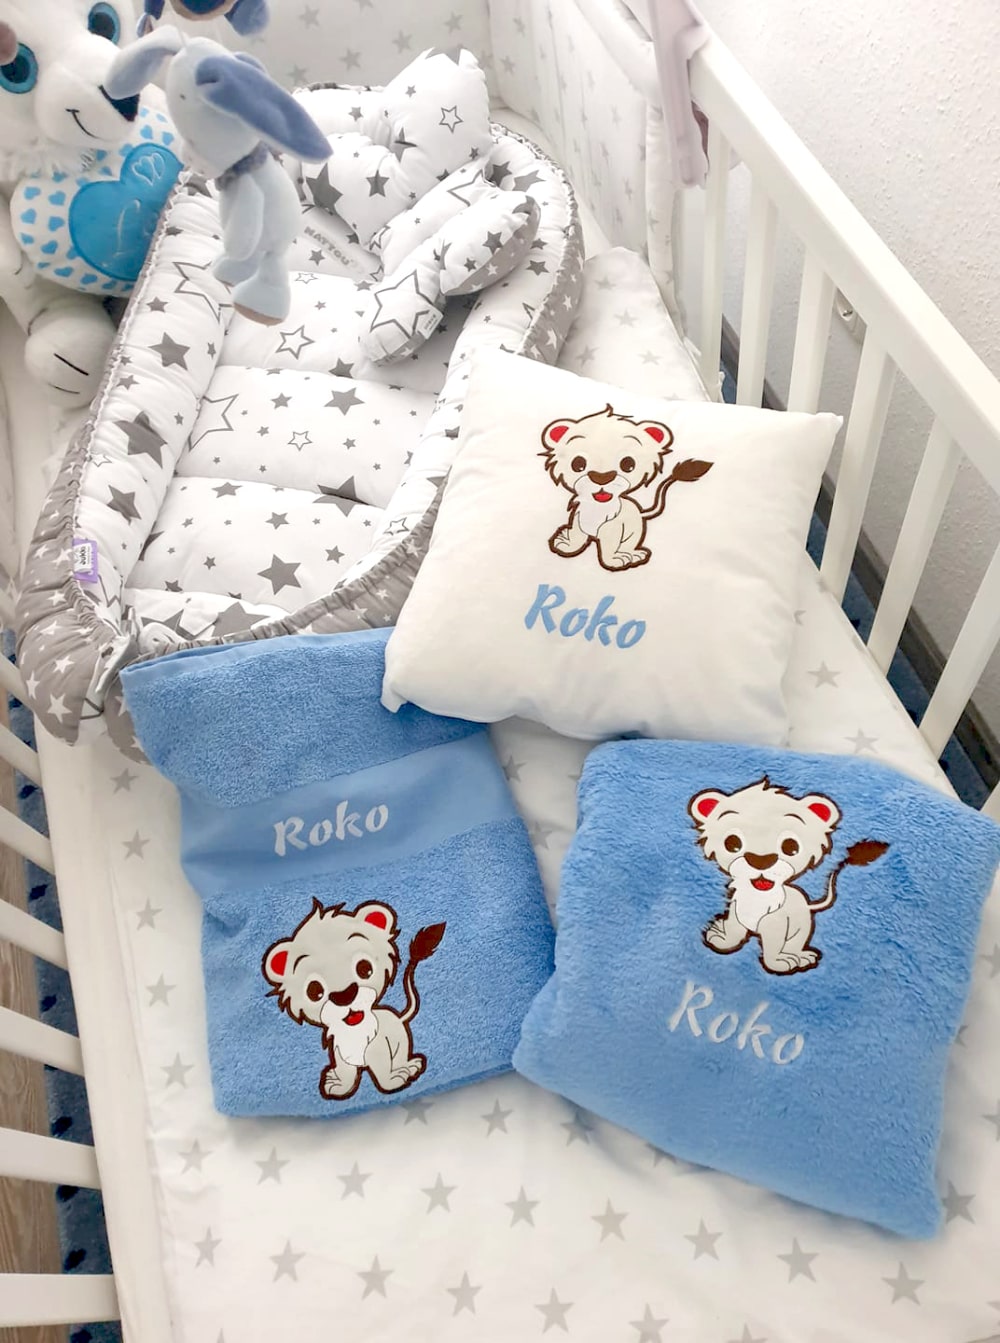 A personalized set for kids - a pillow, blanket and towel with baby name